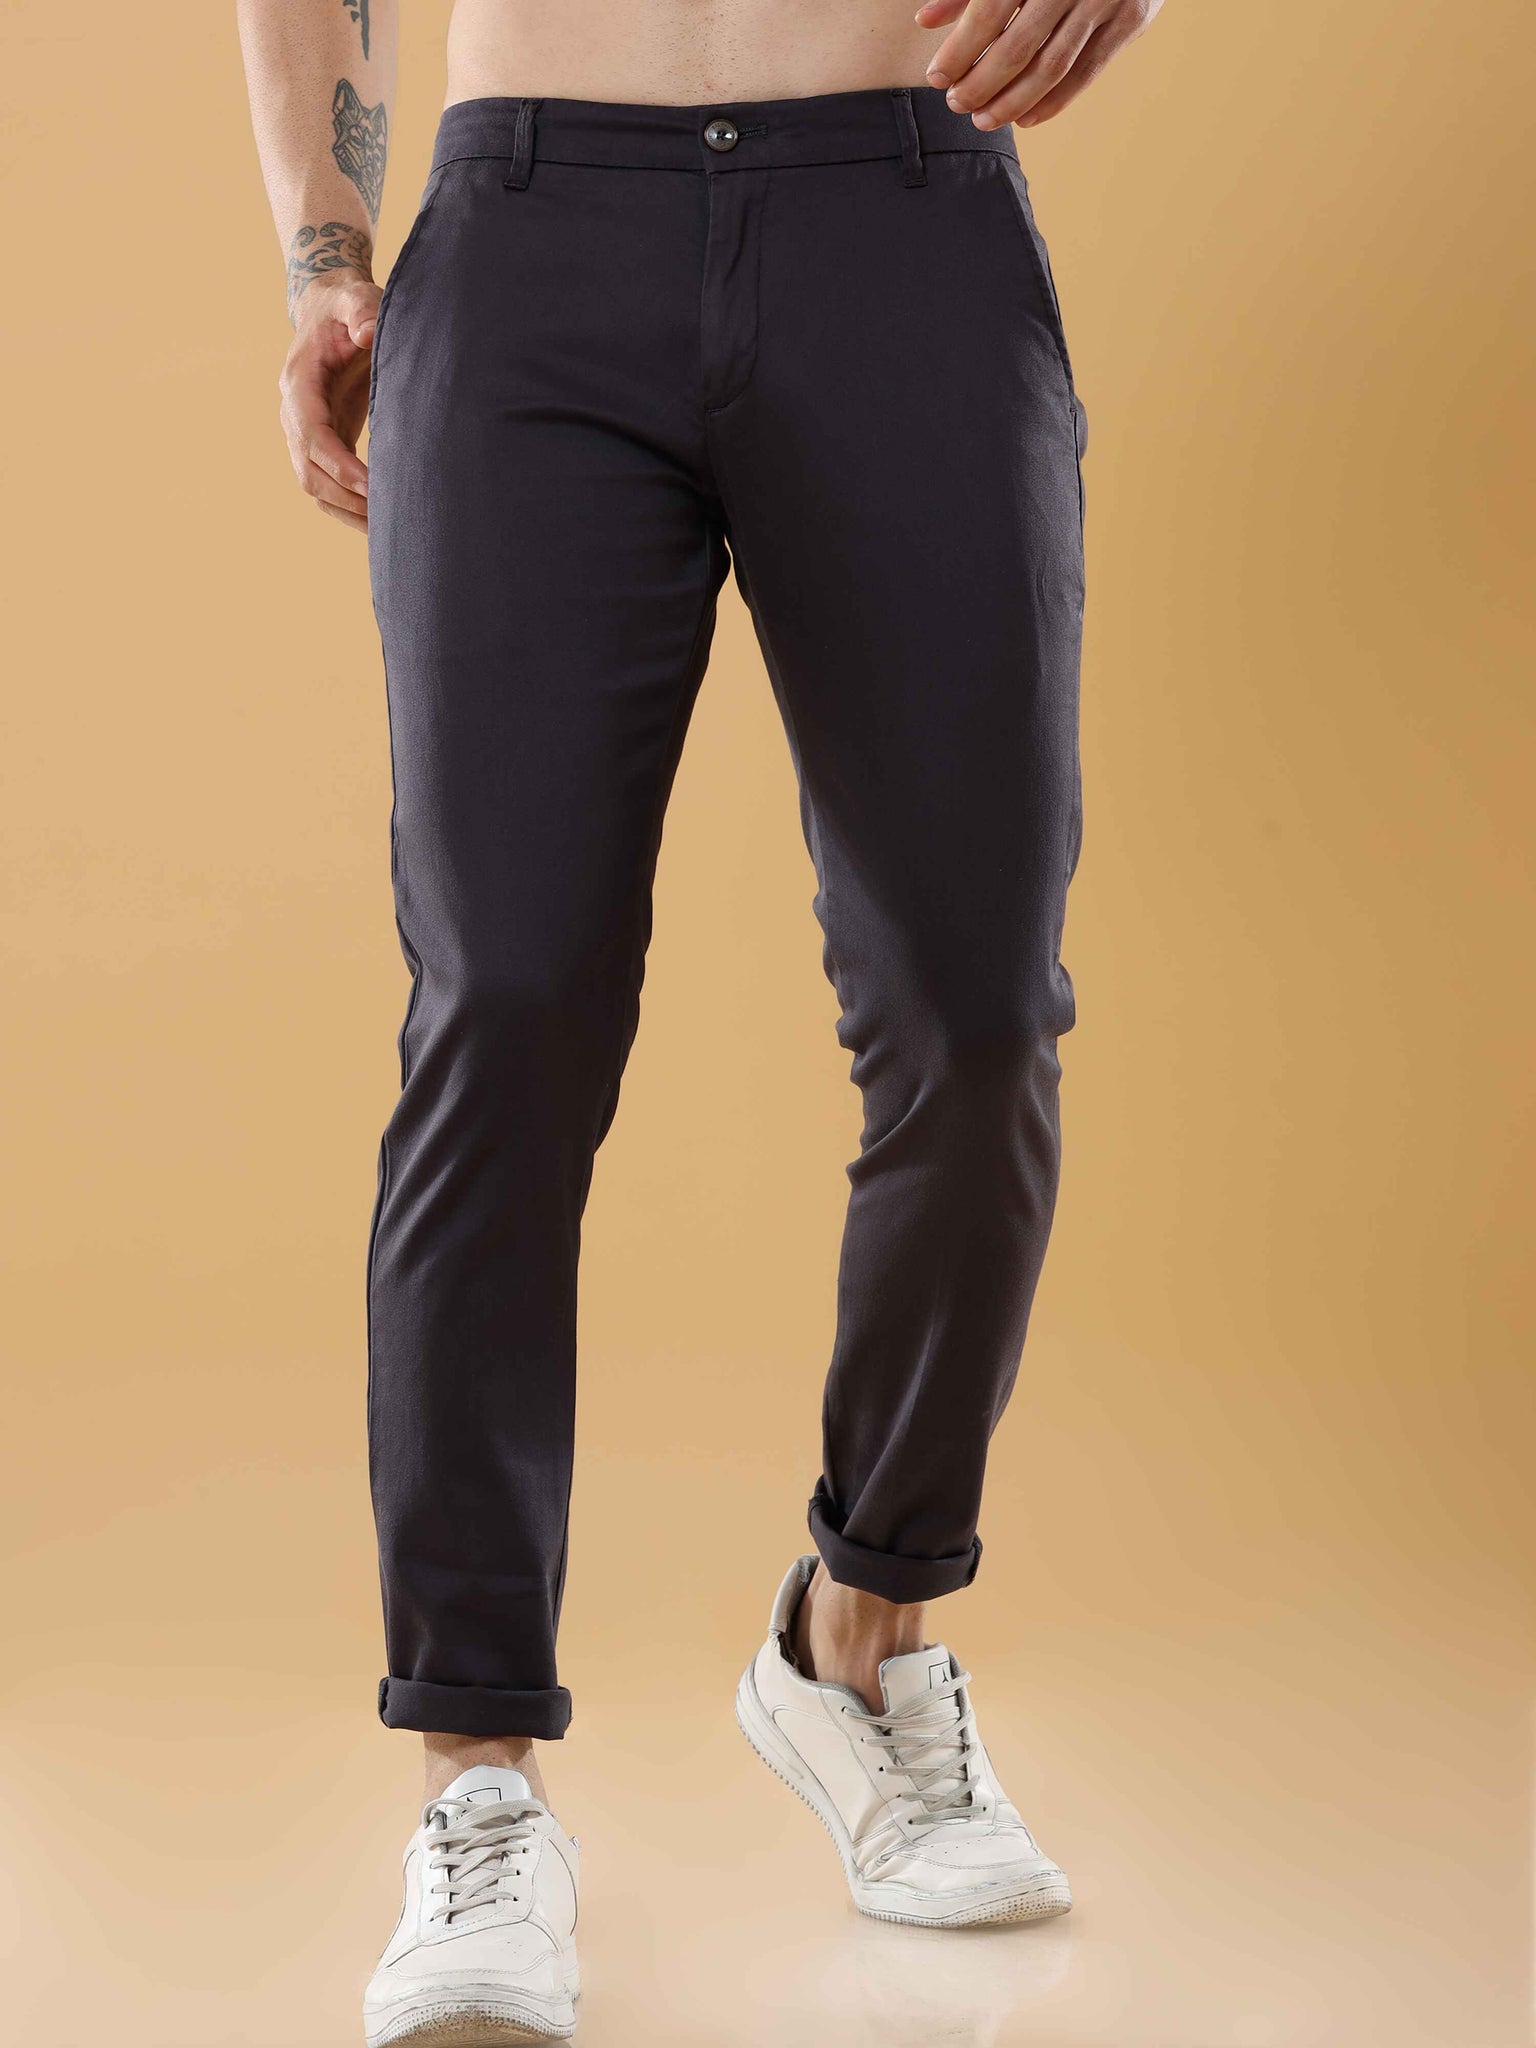 Carbon Black Feather Feel Chinos Trousers